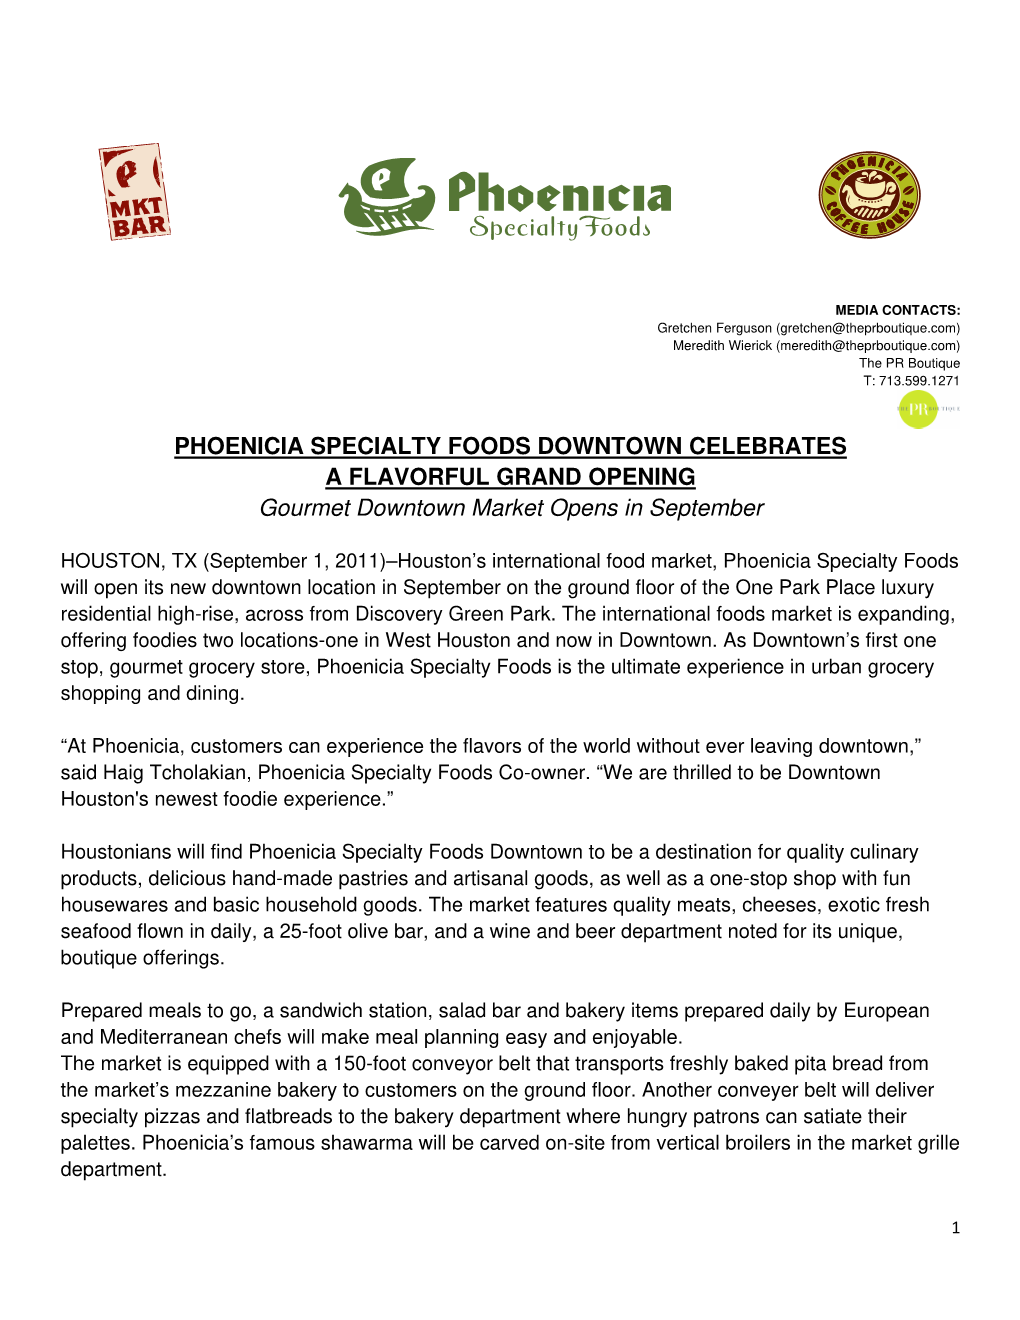 PHOENICIA SPECIALTY FOODS DOWNTOWN CELEBRATES a FLAVORFUL GRAND OPENING Gourmet Downtown Market Opens in September